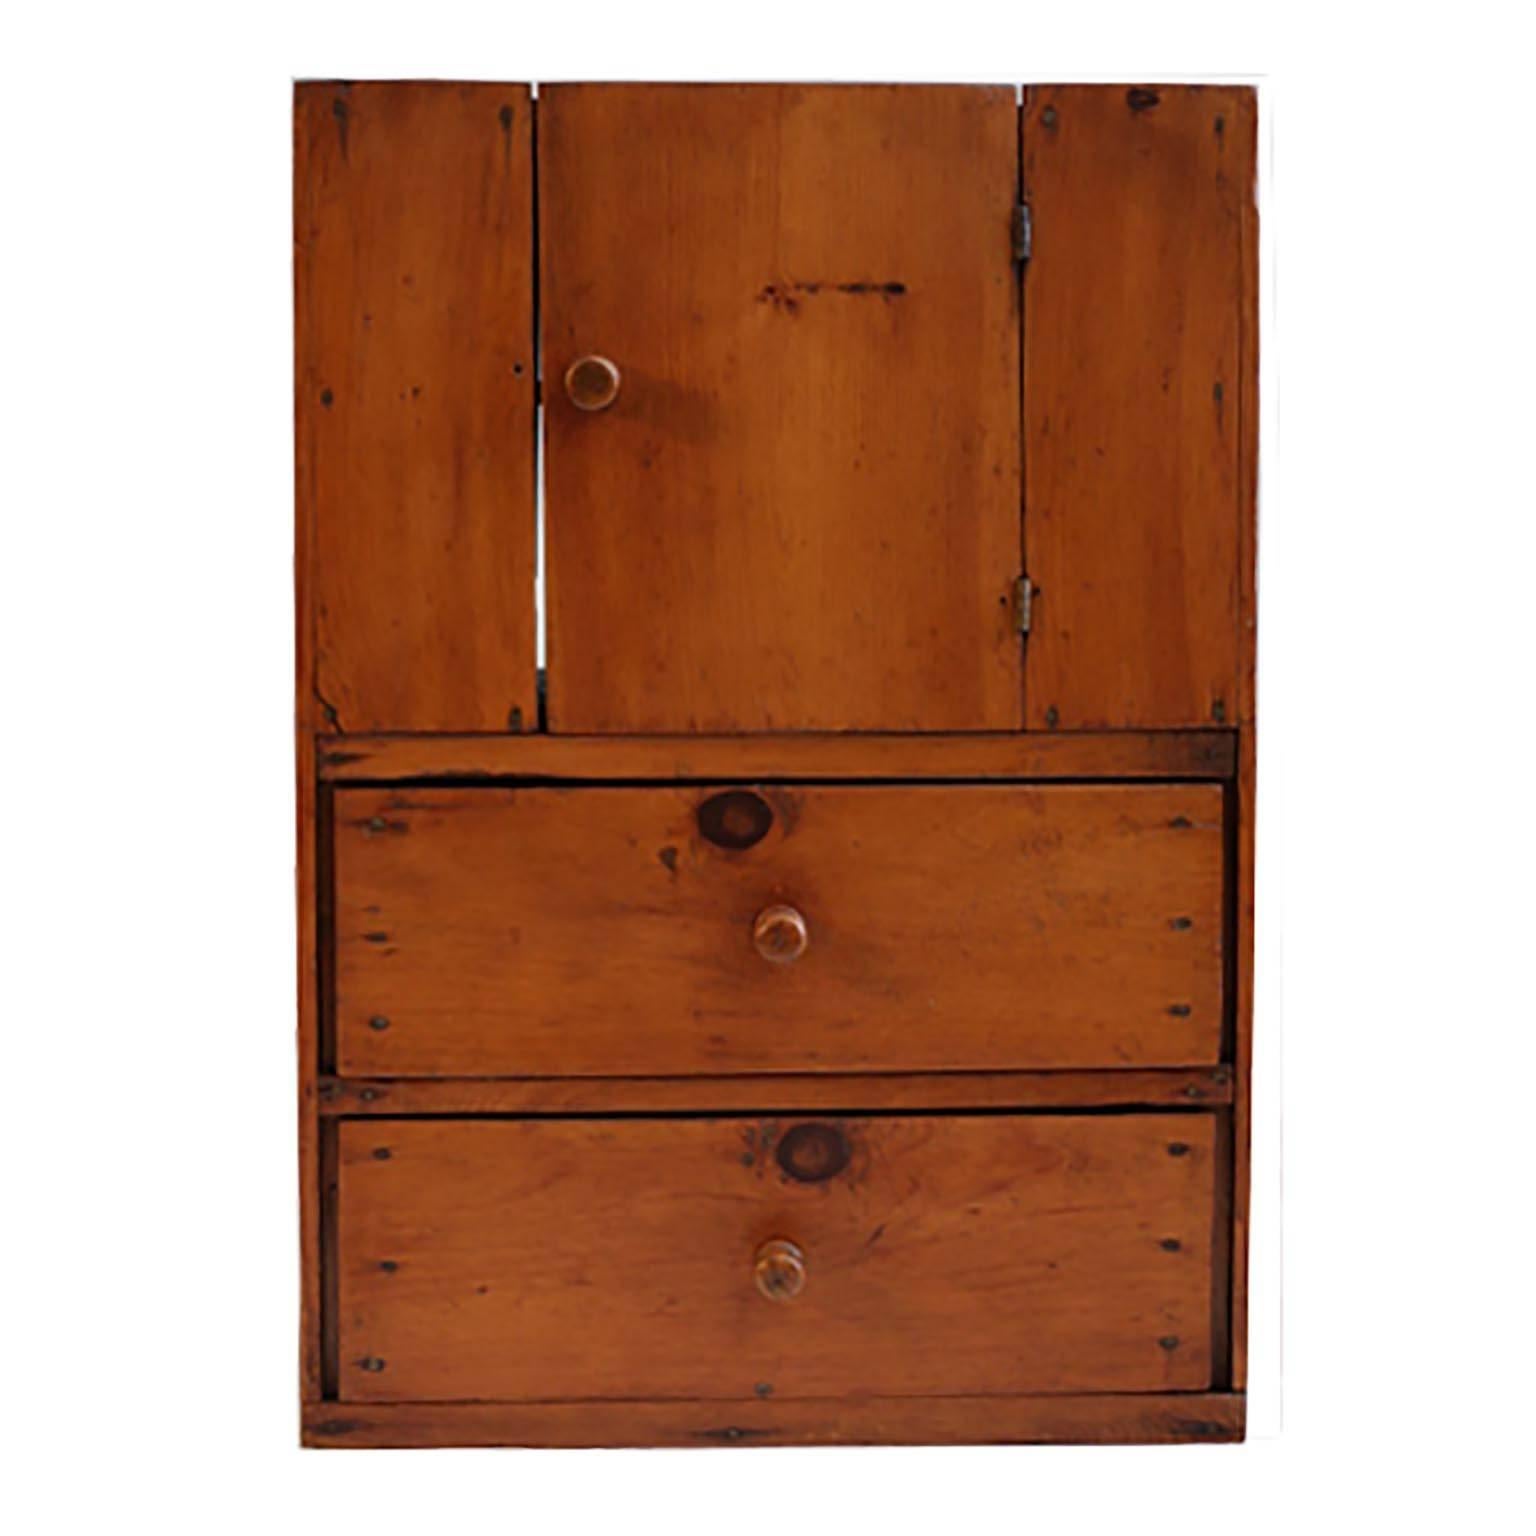 Primitive southern pine cabinet with square nailheads and hand-turned knobs.